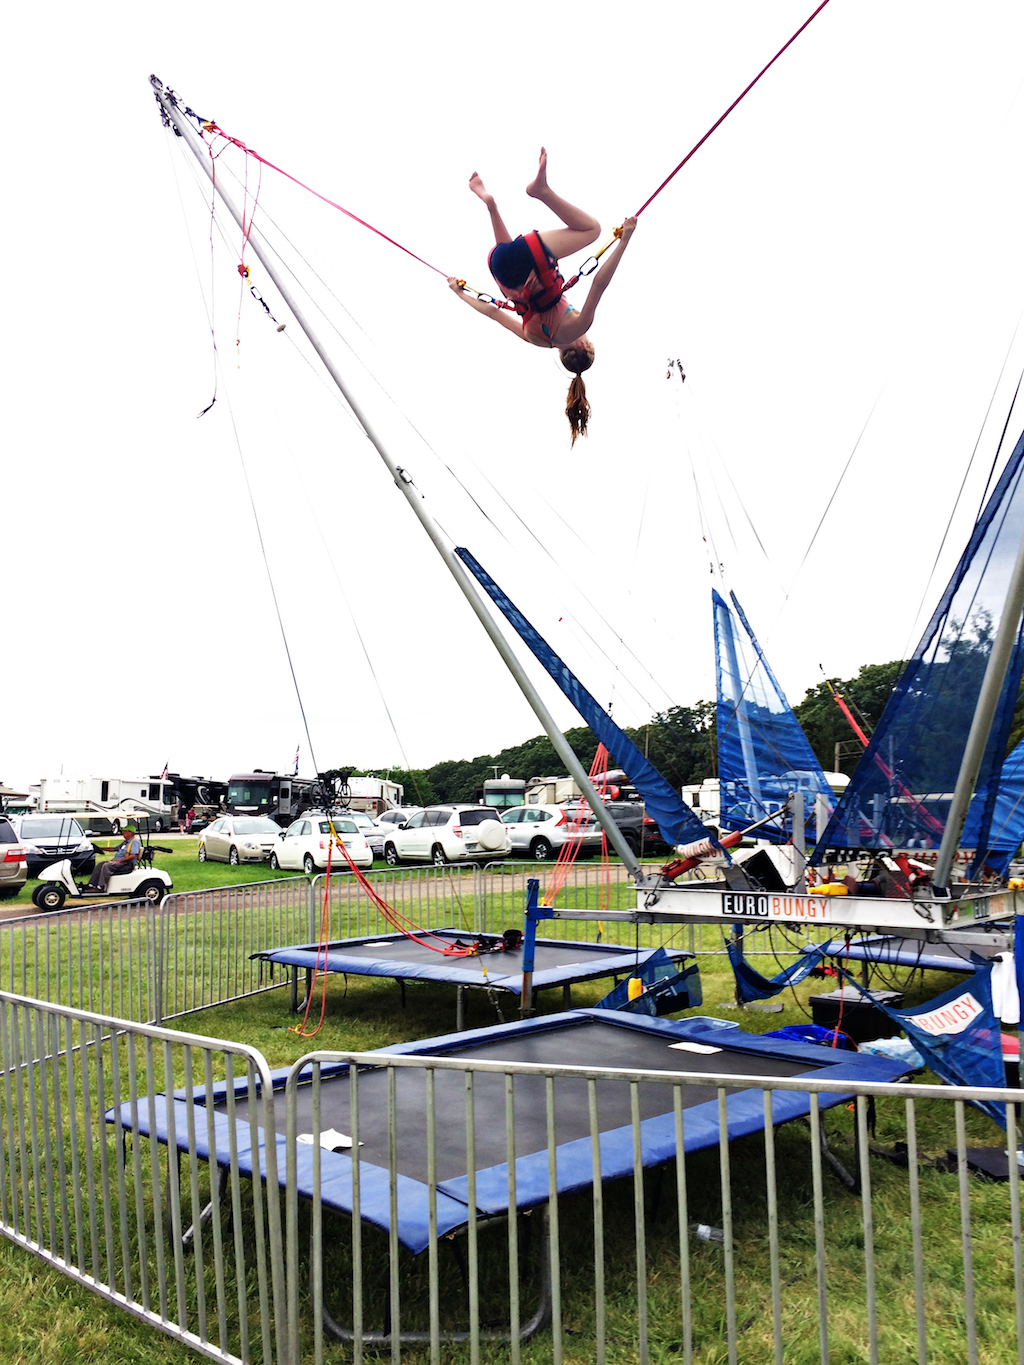 Girl bungee jumping at GNR.